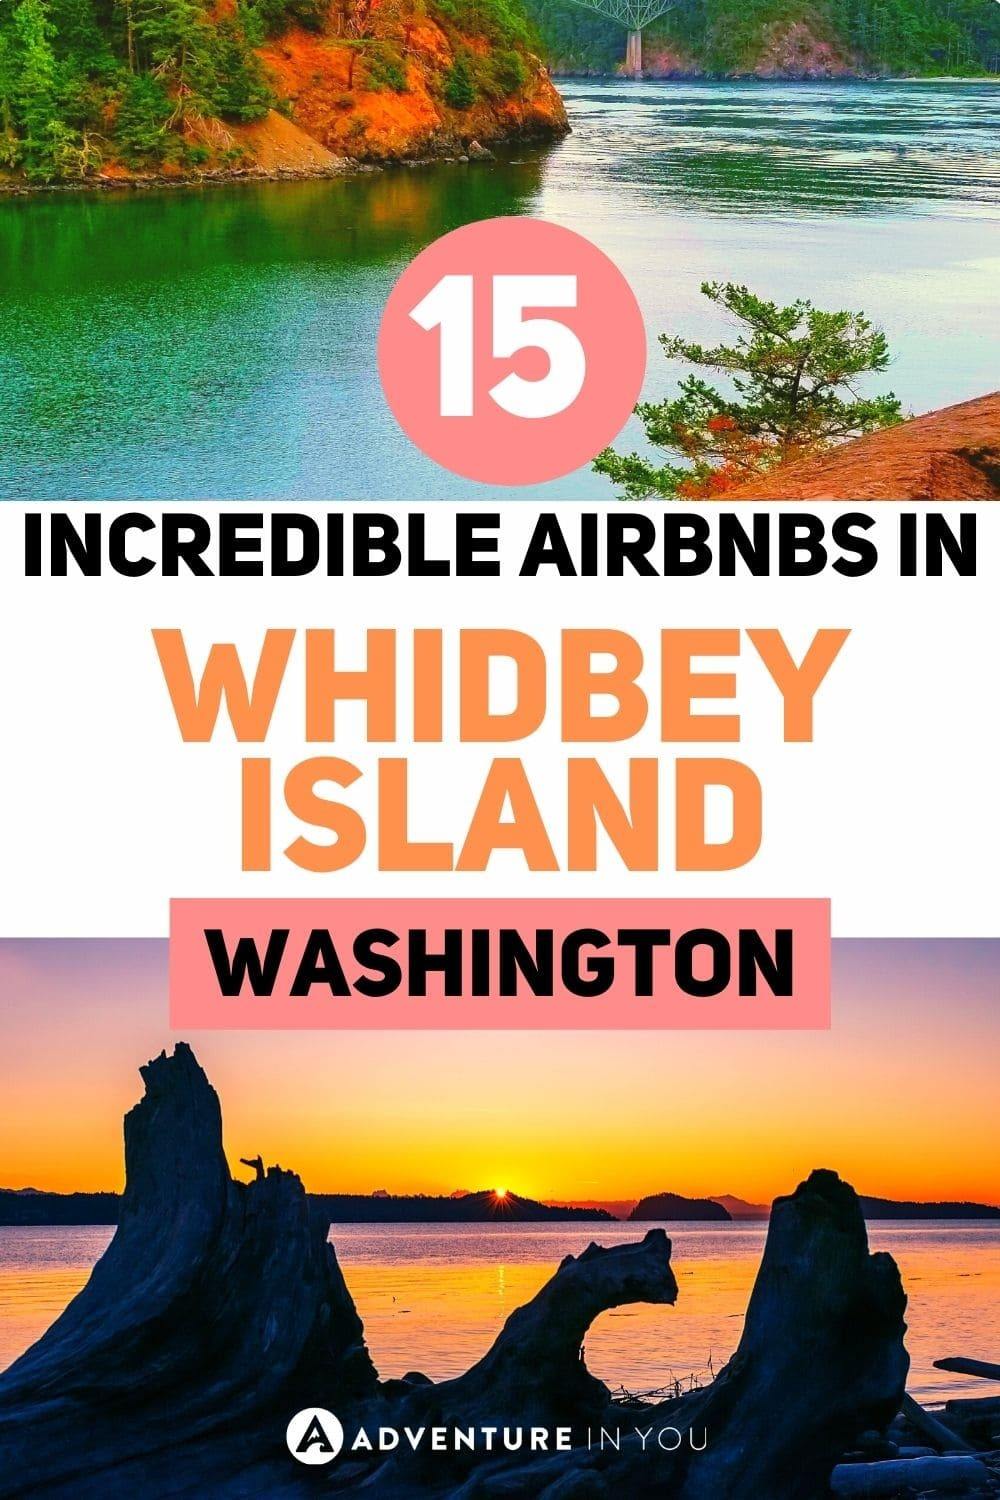 Airbnbs in Whidbey Island | Looking for the best Airbnbs in Whidbey Island here to see our top picks. #usa #washington #whidbeyisland #wheretostayinwhidbeyisland